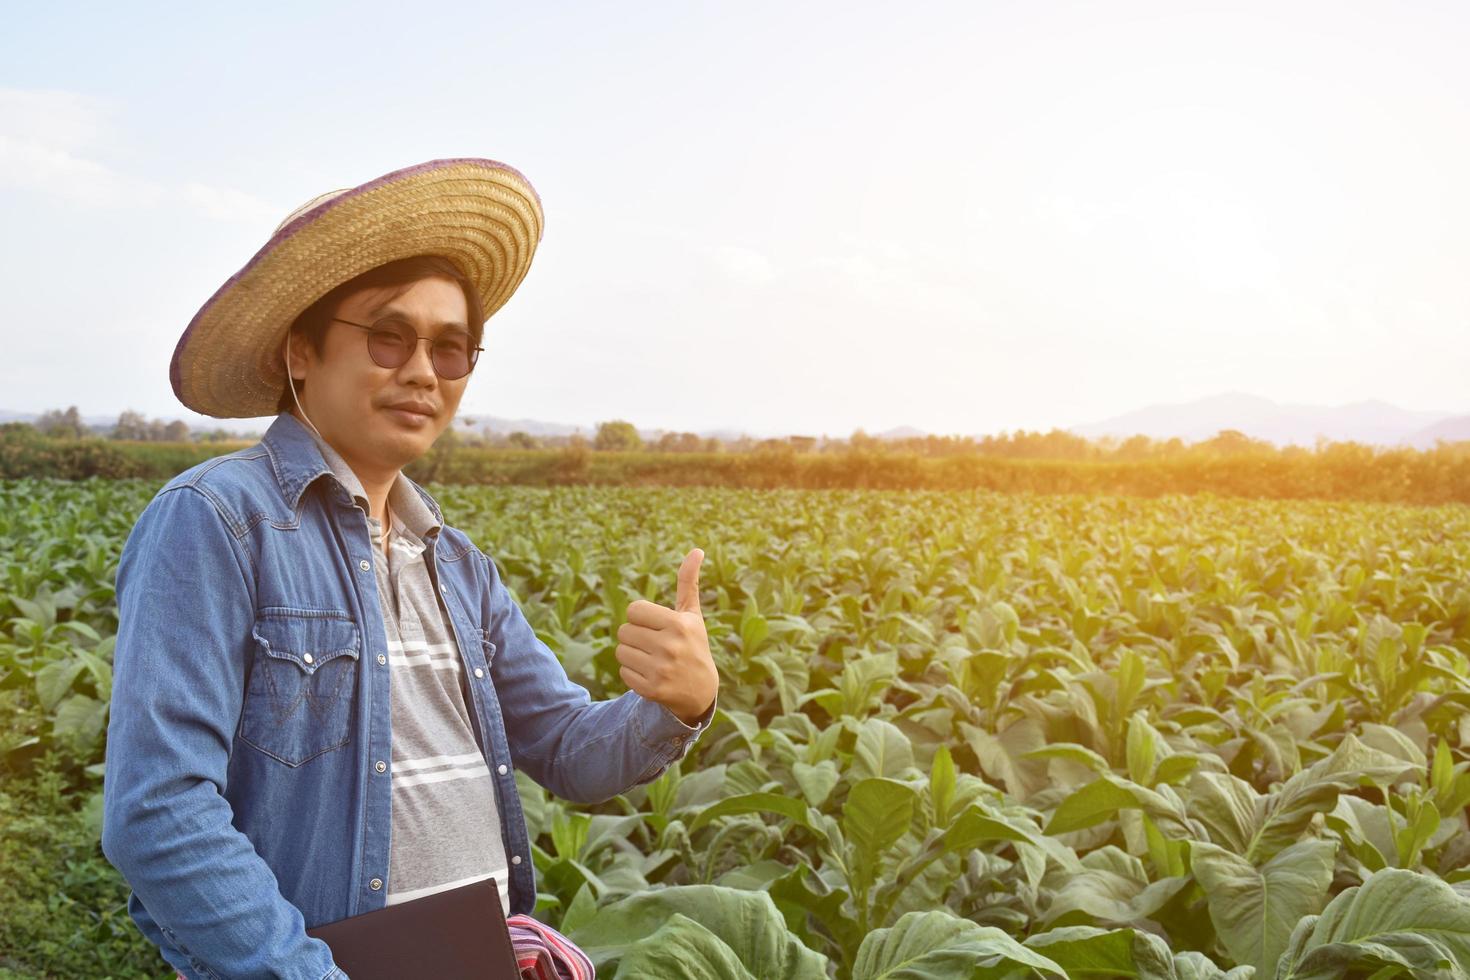 Asian horticulture geneticist is working on local tobacco farm to store data of planting, cultivar development and plant diseases in the afternoon, soft and selective focus. photo